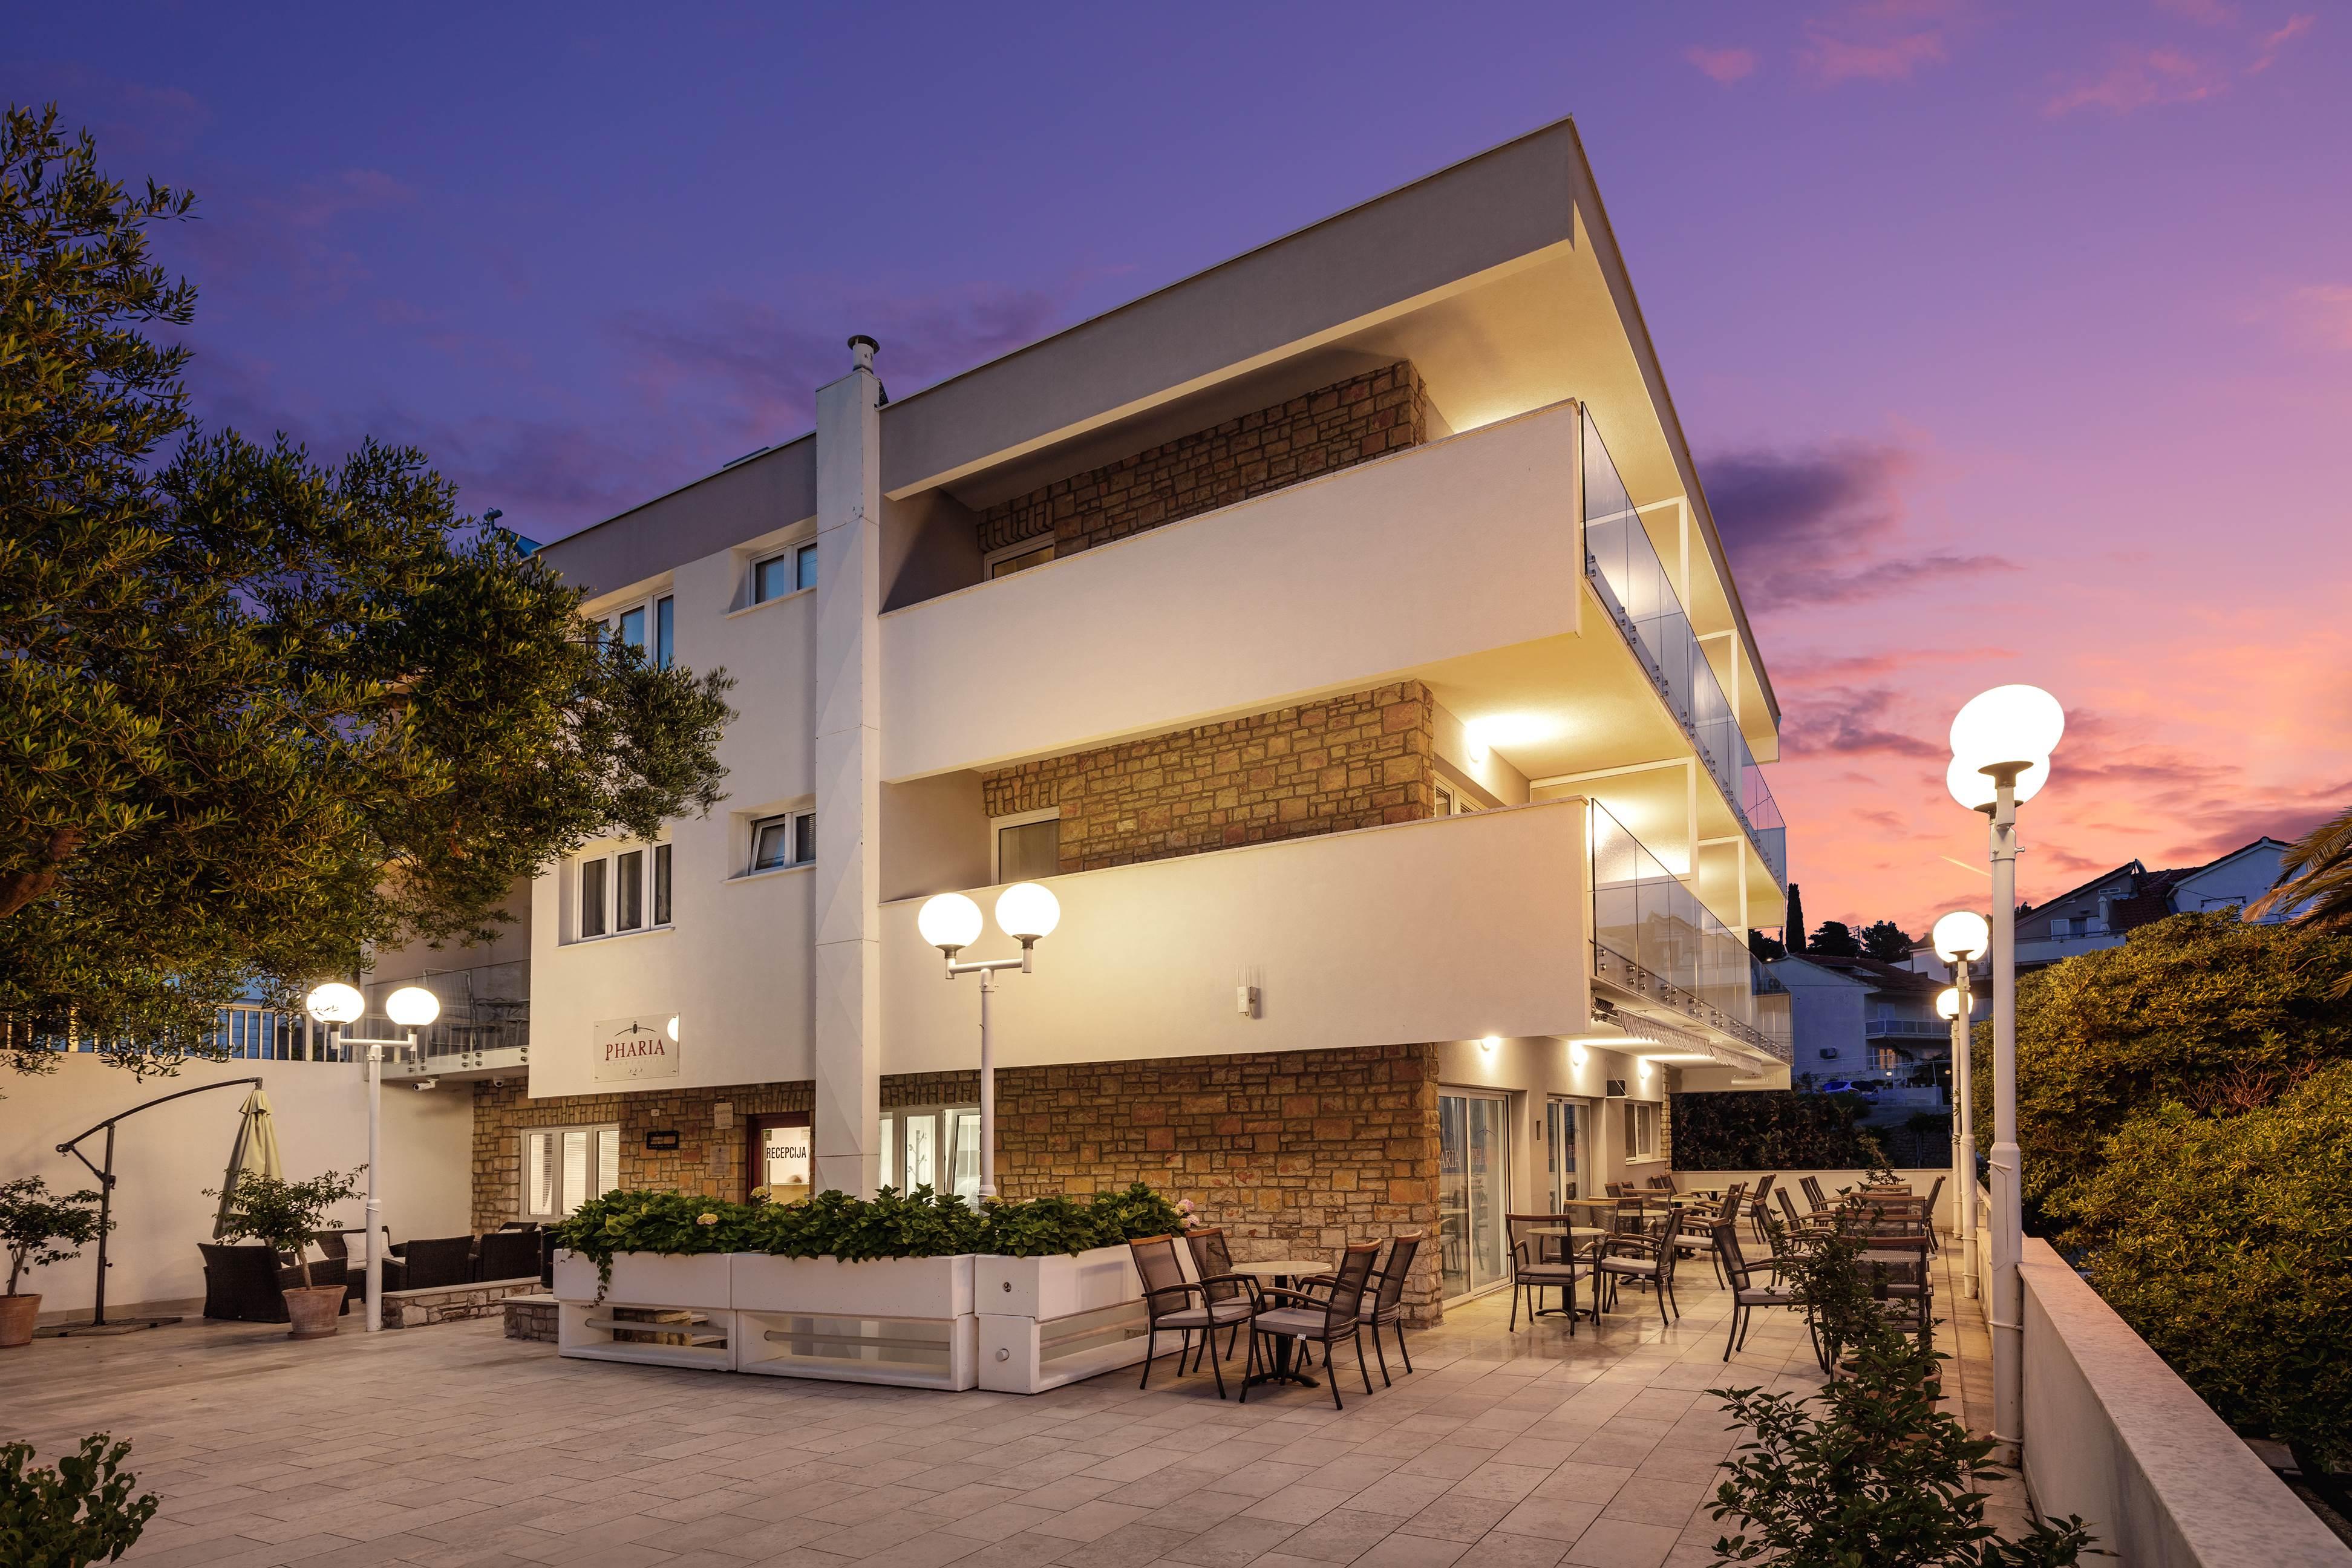 Pharia Hotel And Apartments - By The Beach Hvar Town Exterior foto